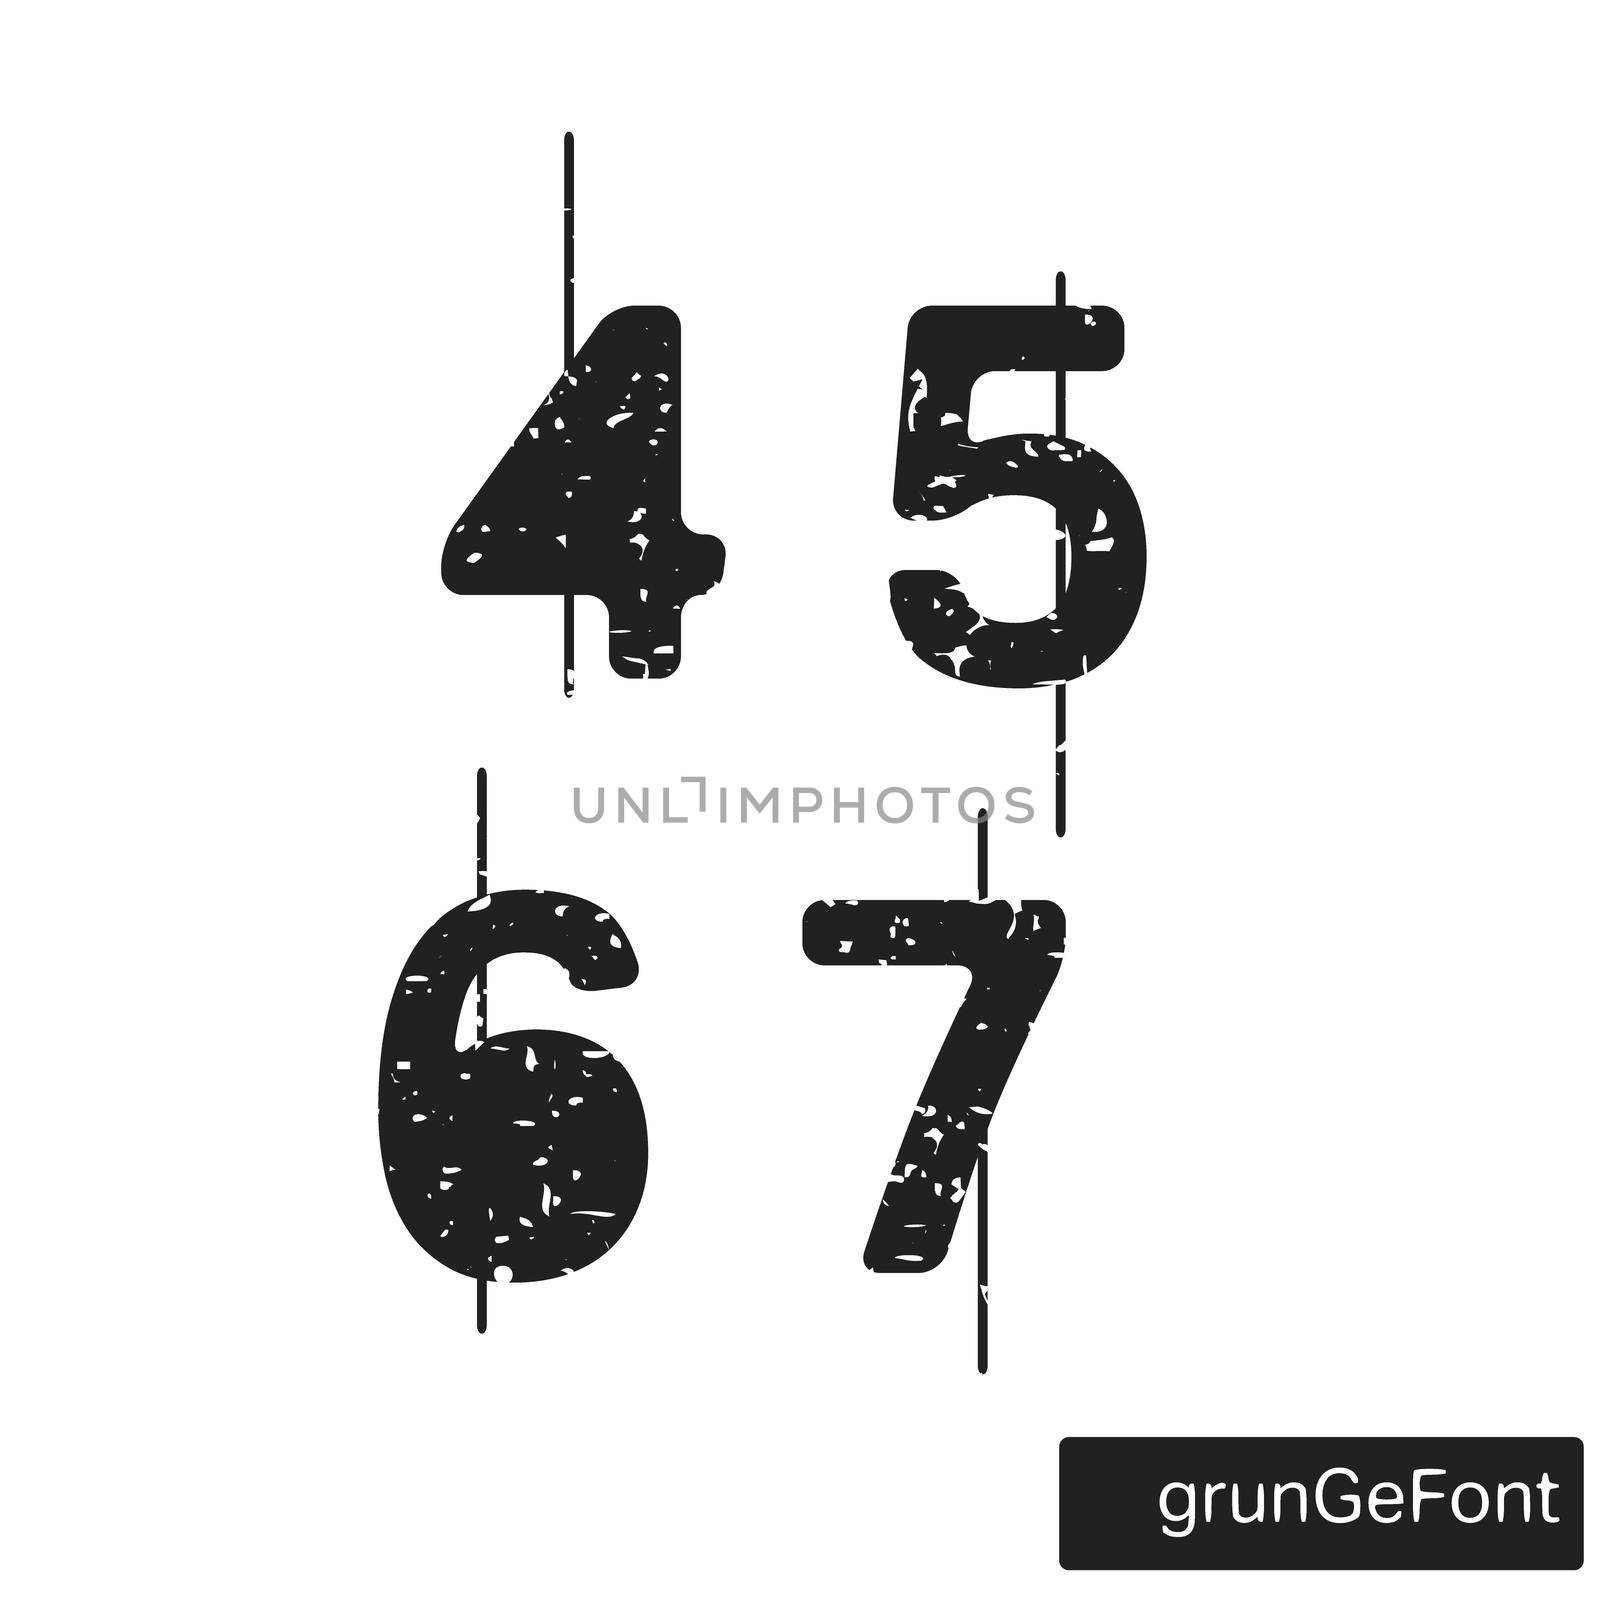 Alphabet grunge font template. Set of numbers 4, 5, 6, 7 logo or icon. Vector illustration.